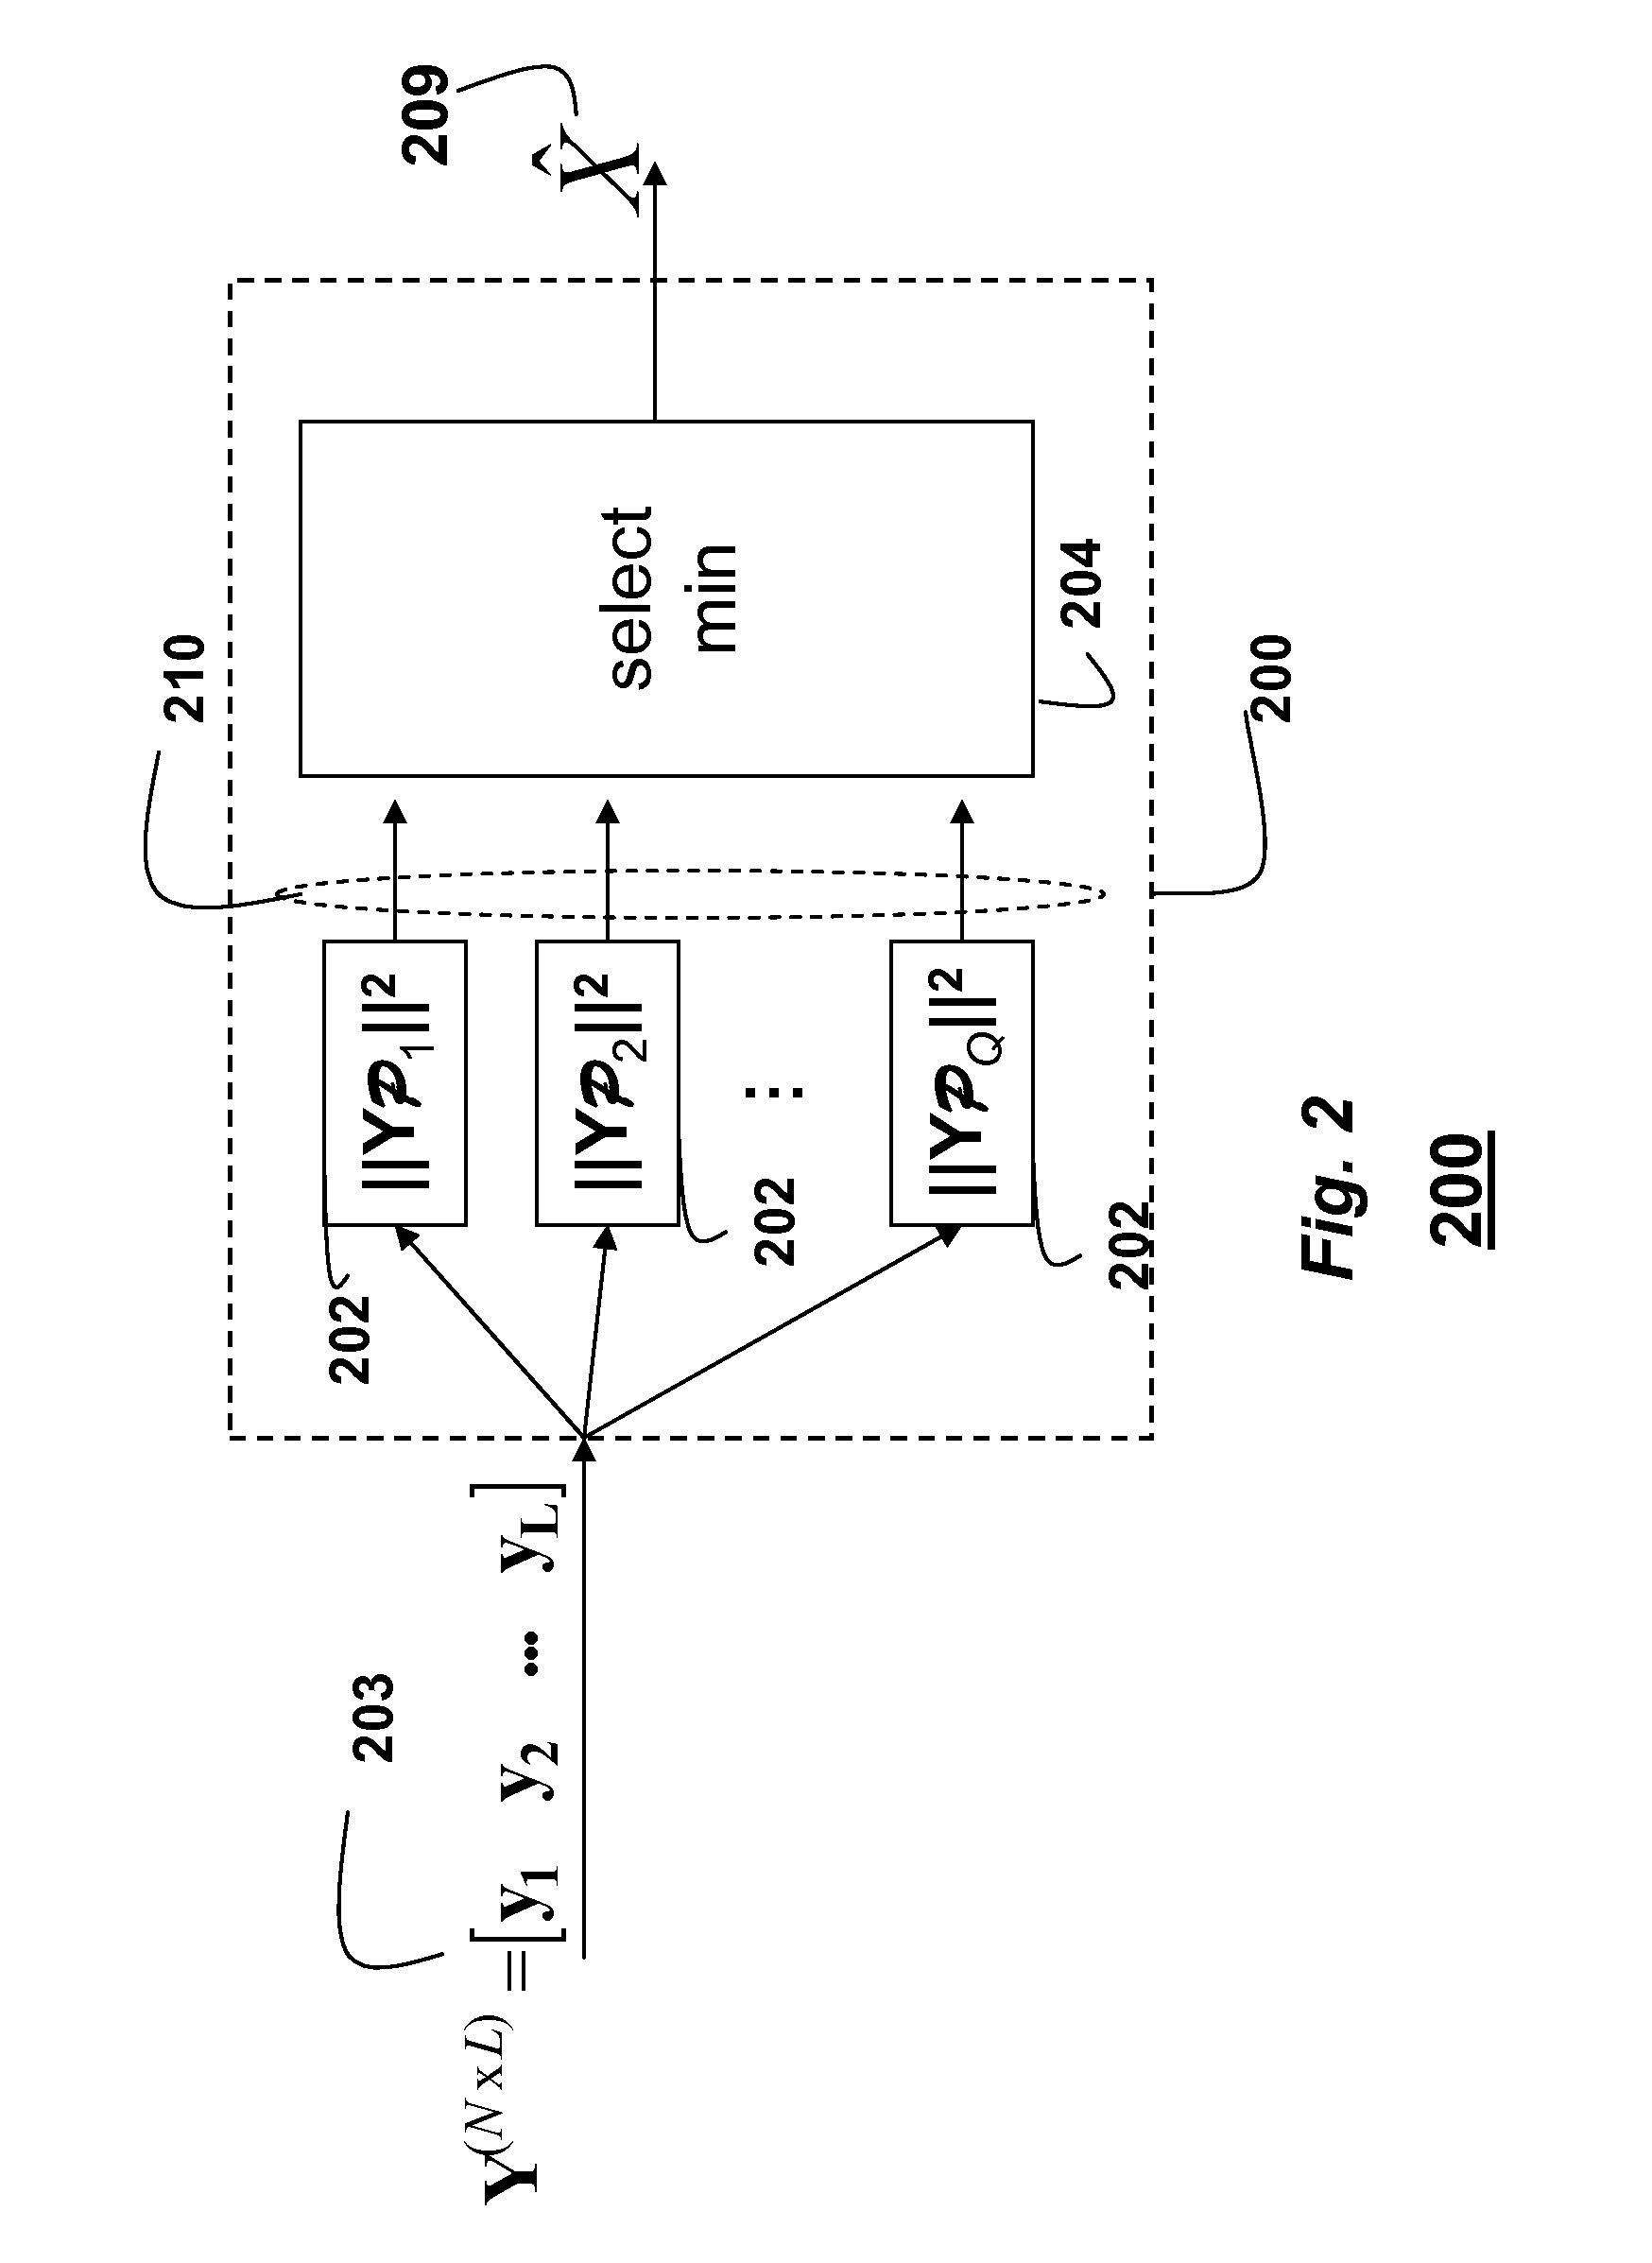 Method for decoding codewords transmitted over non-coherent channels in MIMO-OFDM networks using Grassmann codes and superblocks